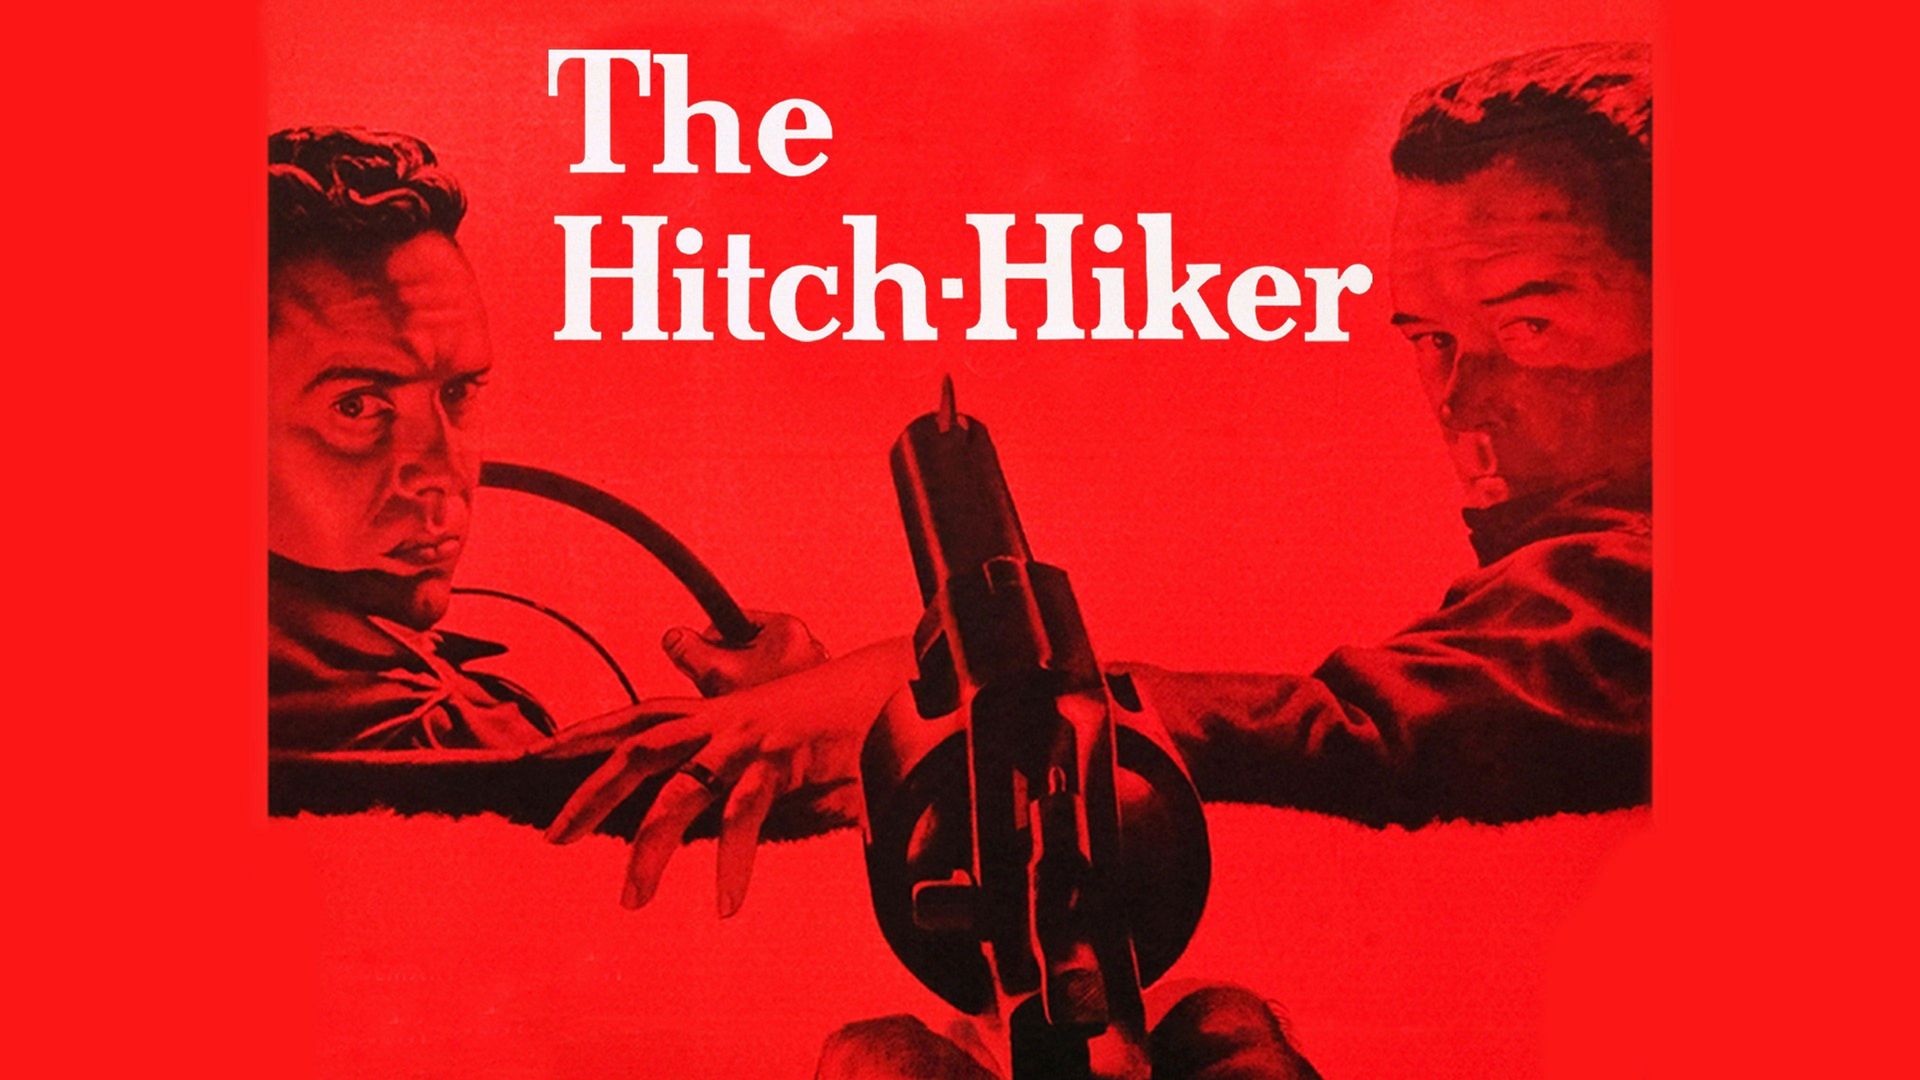 The Hitch-Hiker Backdrop